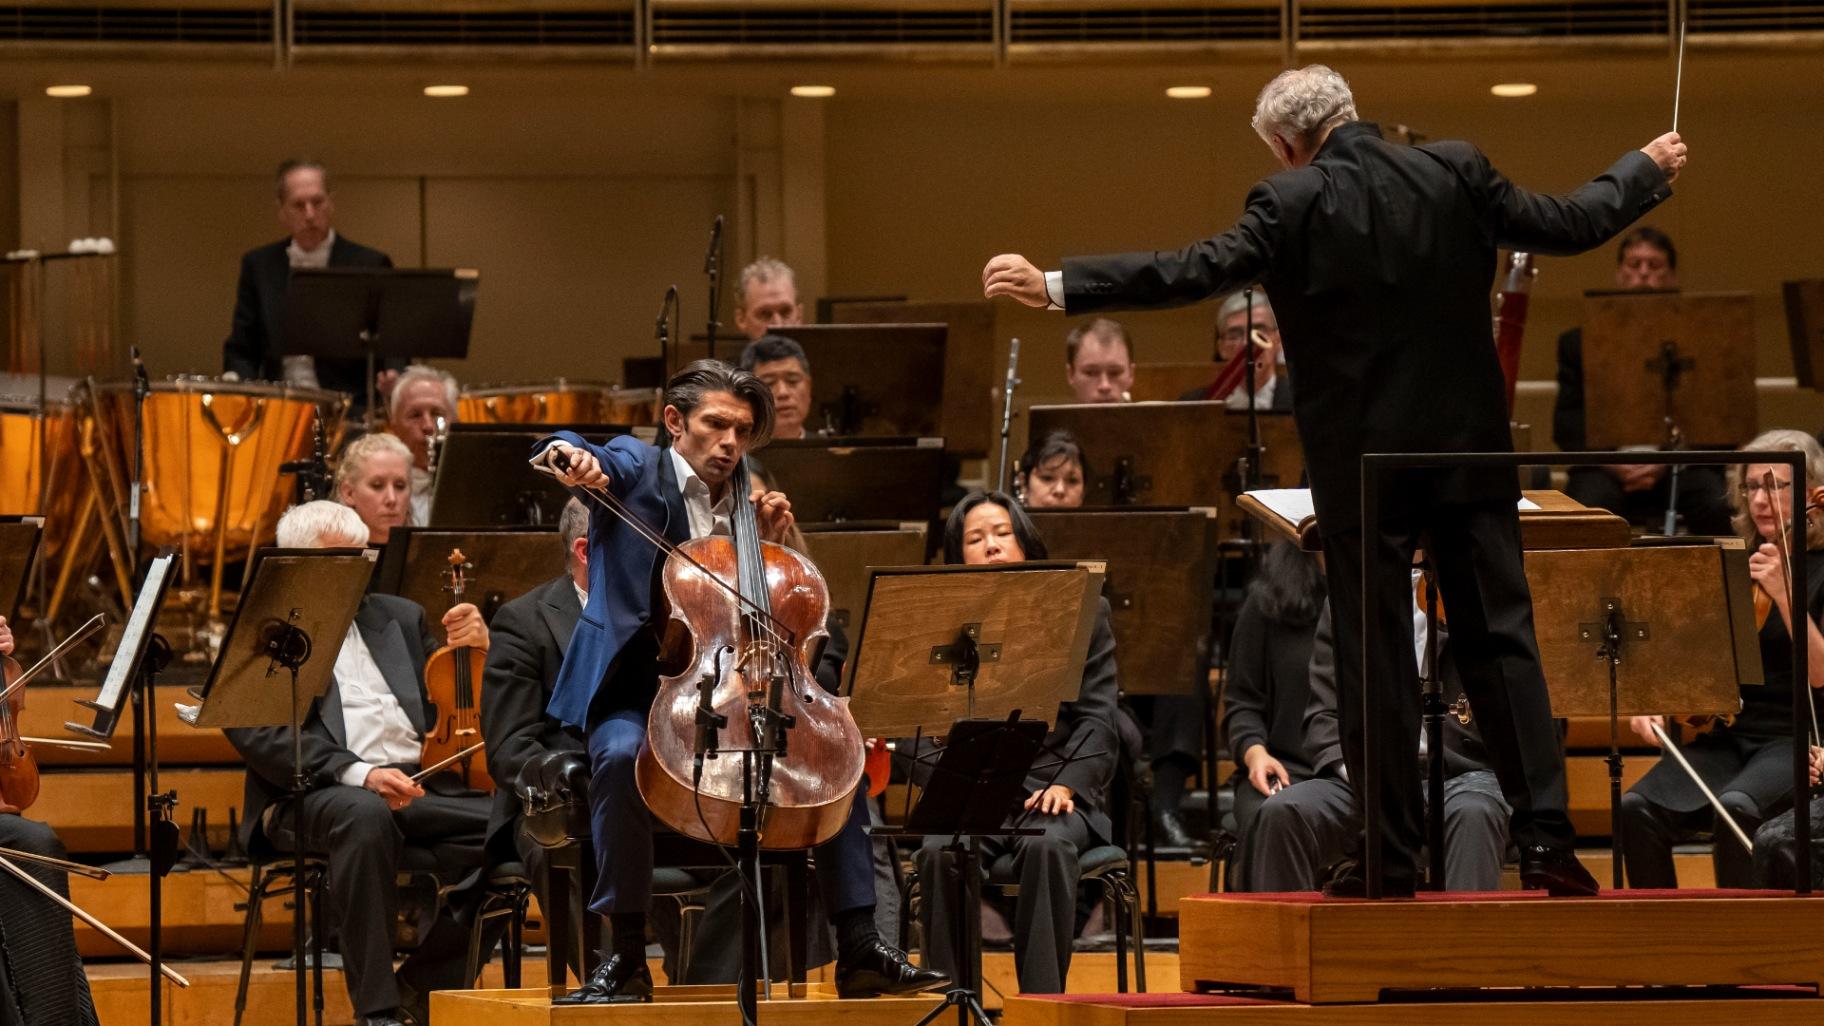 A CSO co-commission, Lera Auerbach’s cello concerto, “Diary of a Madman” receives its U.S. premiere in a performance on Nov. 17, 2022, by the Chicago Symphony Orchestra with Gautier Capuçon as soloist and guest conductor Manfred Honeck. (Credit: Todd Rosenberg)